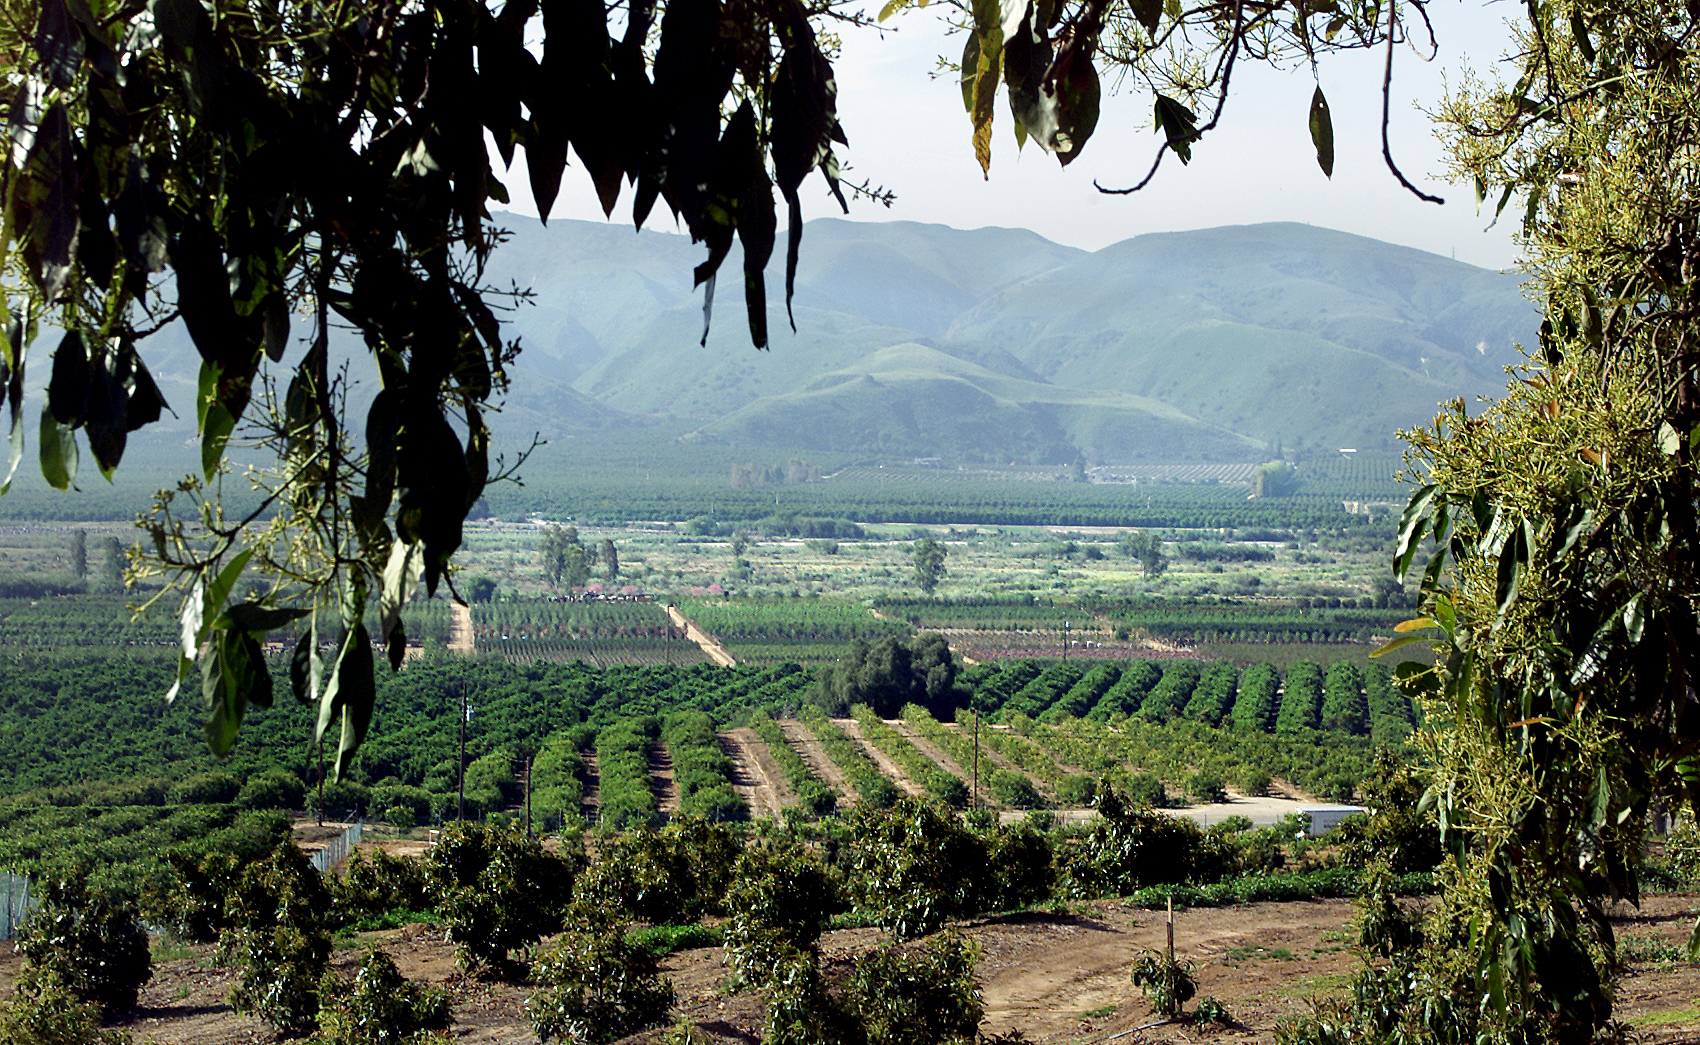 PHOTO: The Santa Clara Valley in Ventura County where the walnut orchards have given way to lemons and avocados and what remains of aging Valencia orange groves.